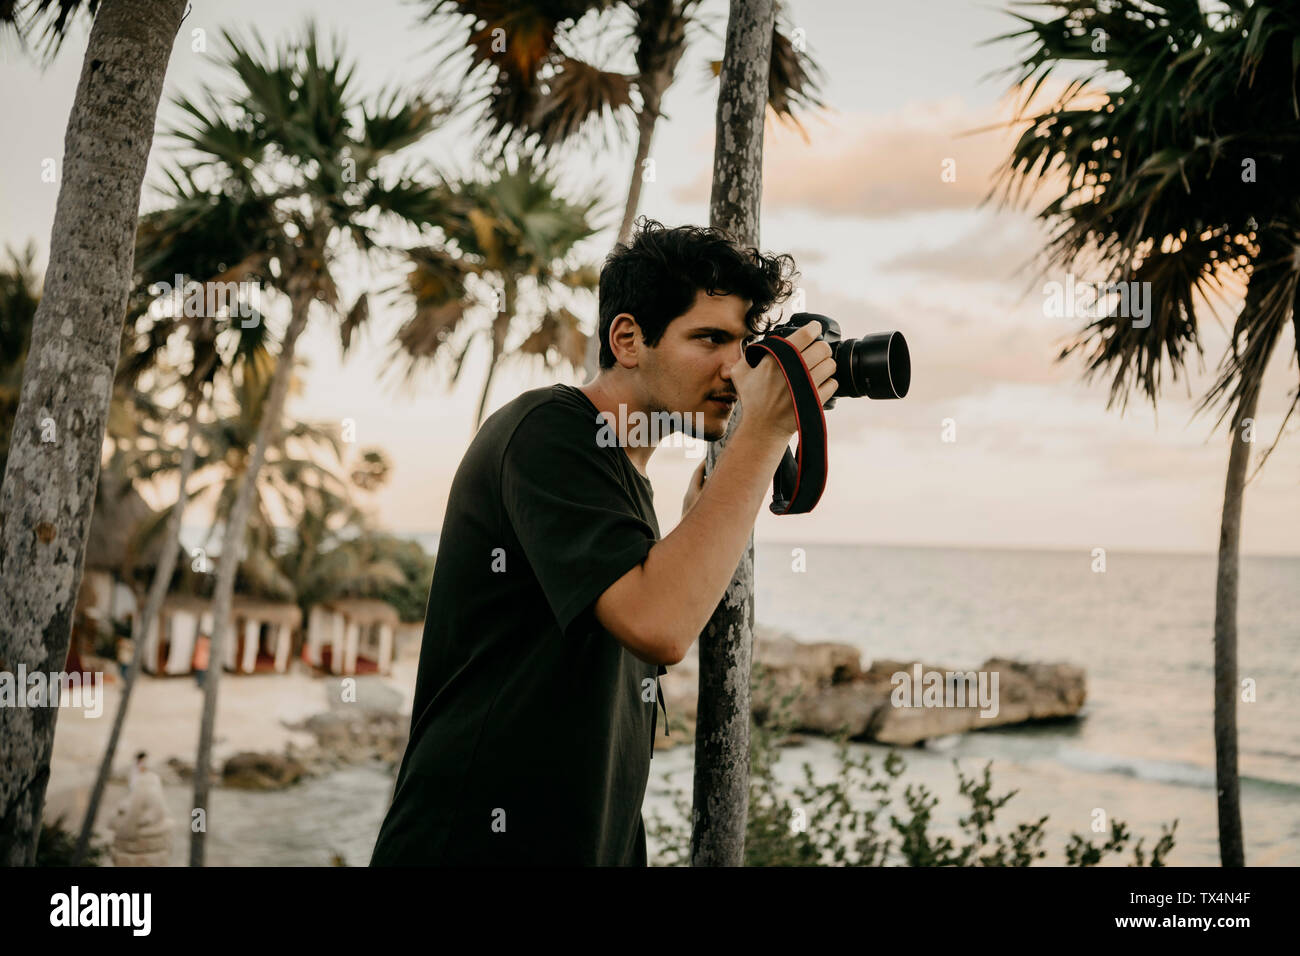 Mexico, Quintana Roo, Tulum, young man taking pictures on the beach Stock Photo